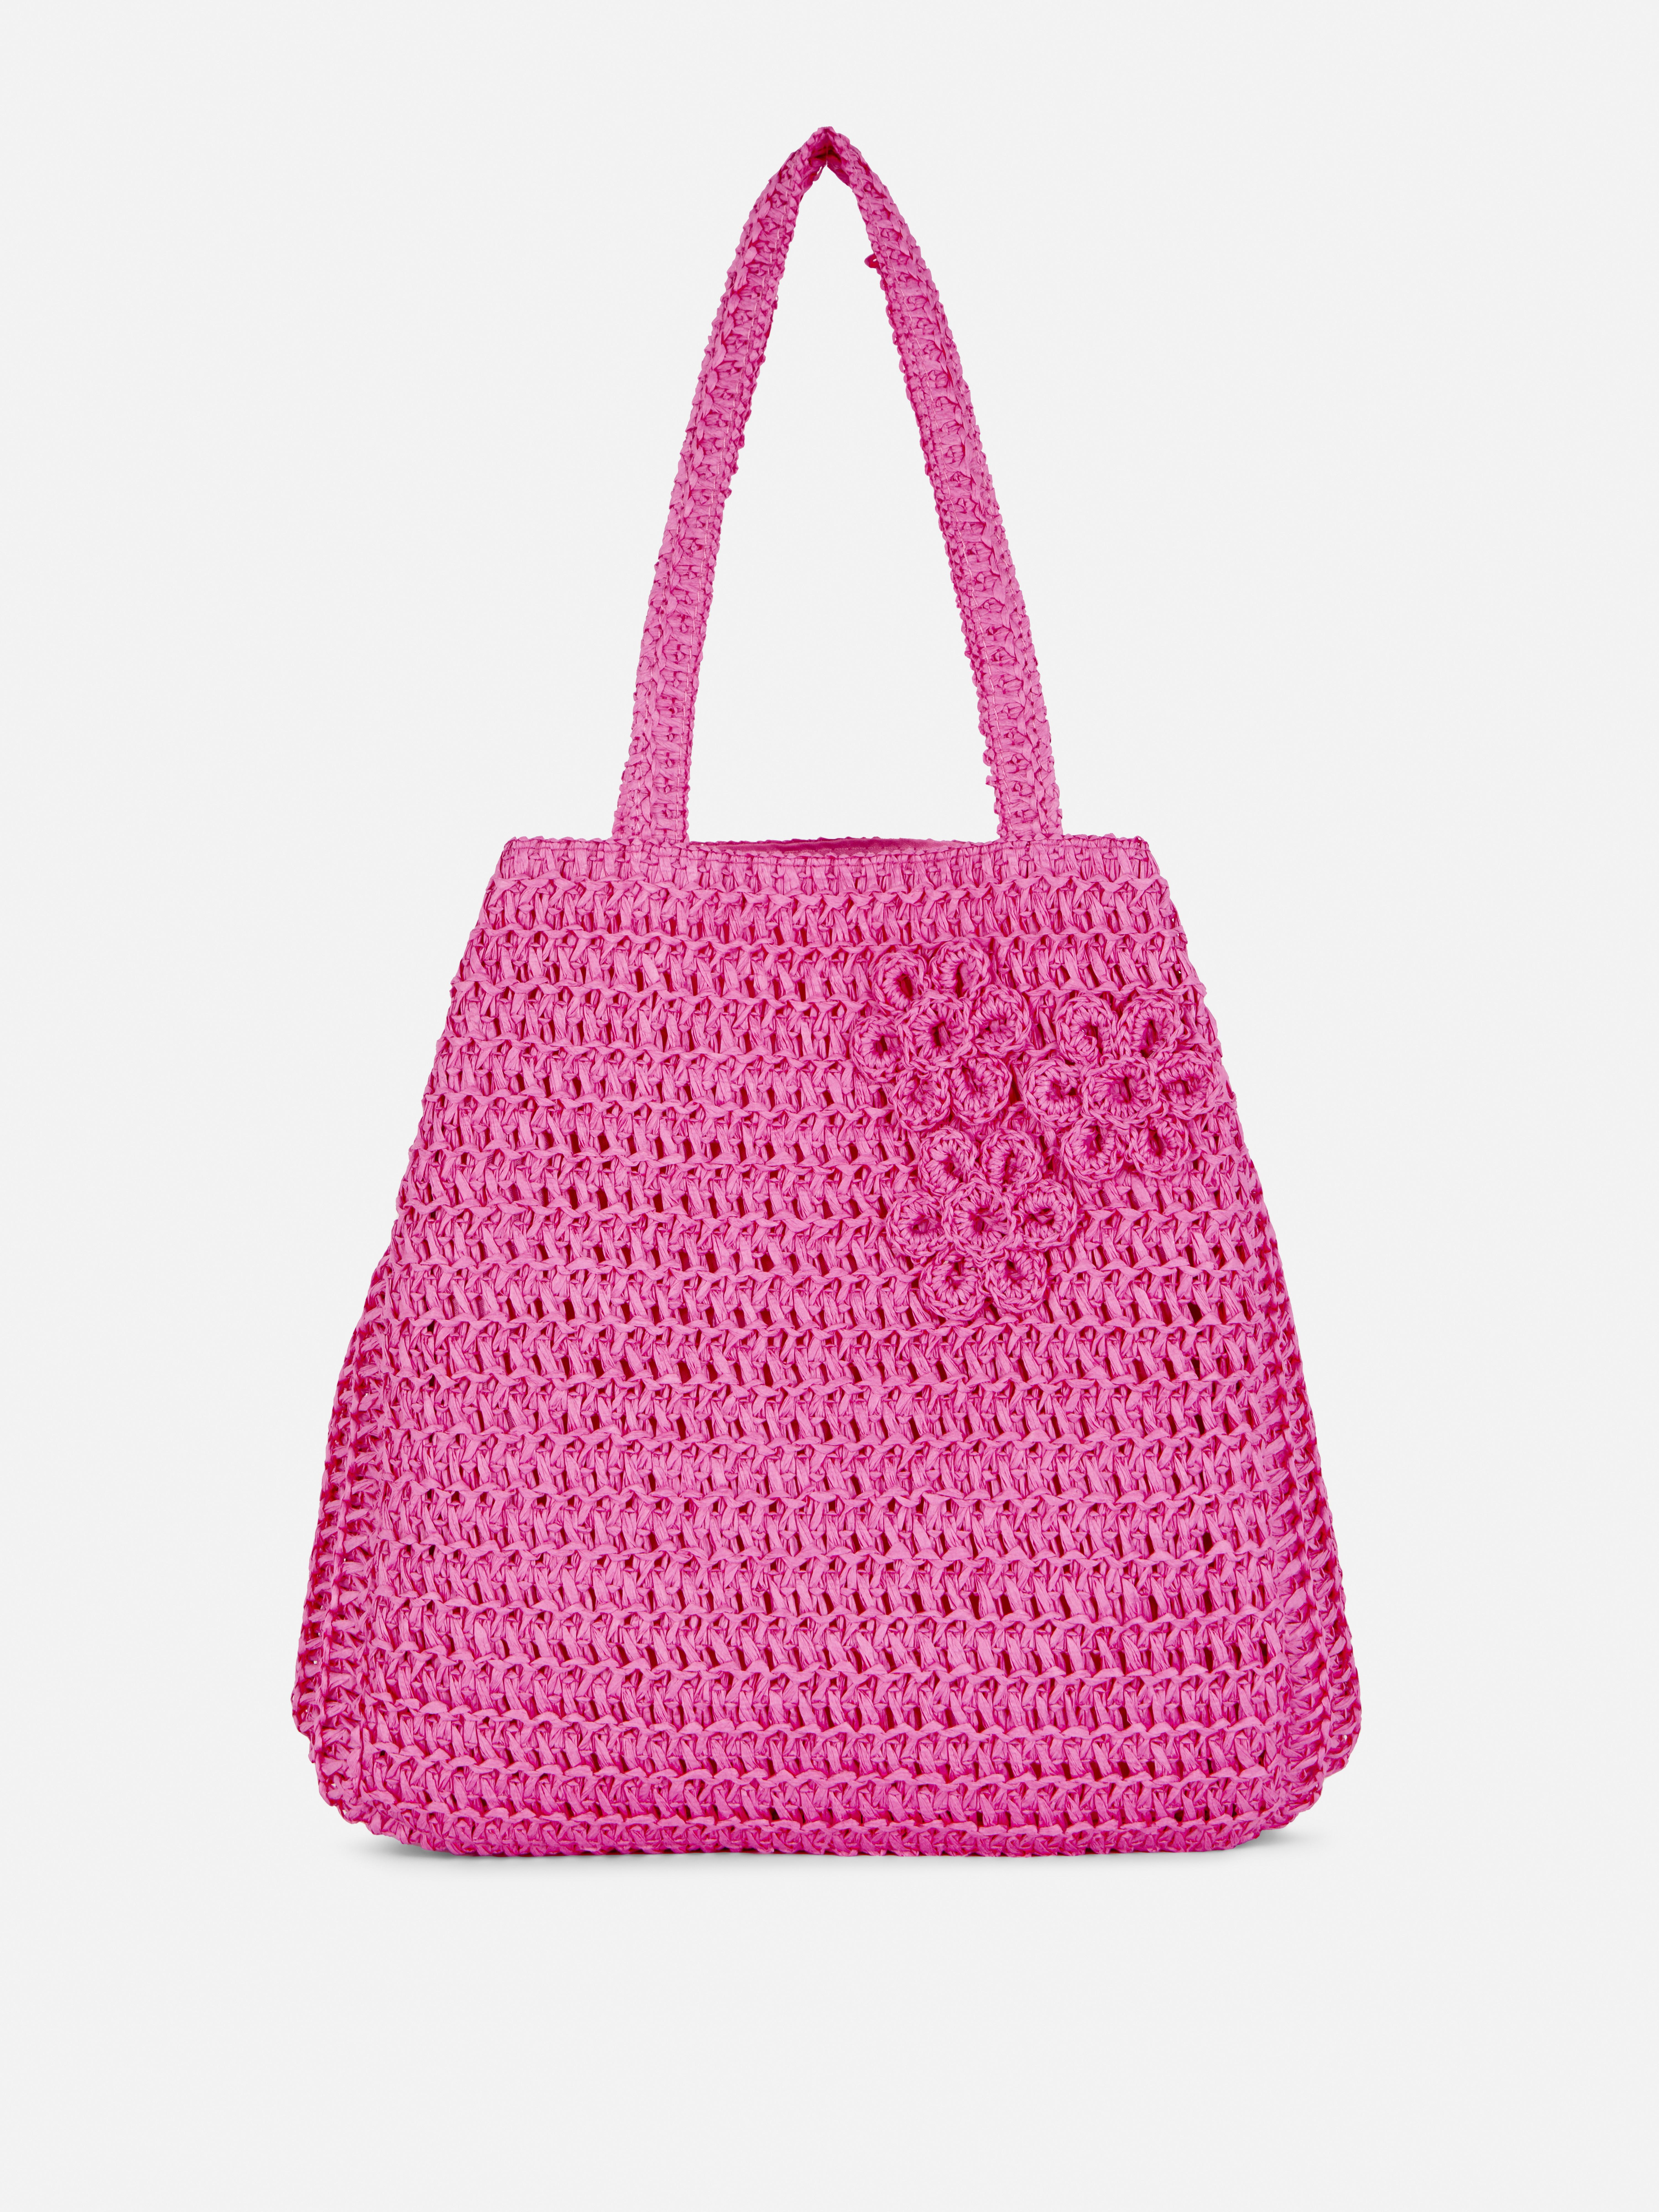 Woven Straw Flower Tote Bag